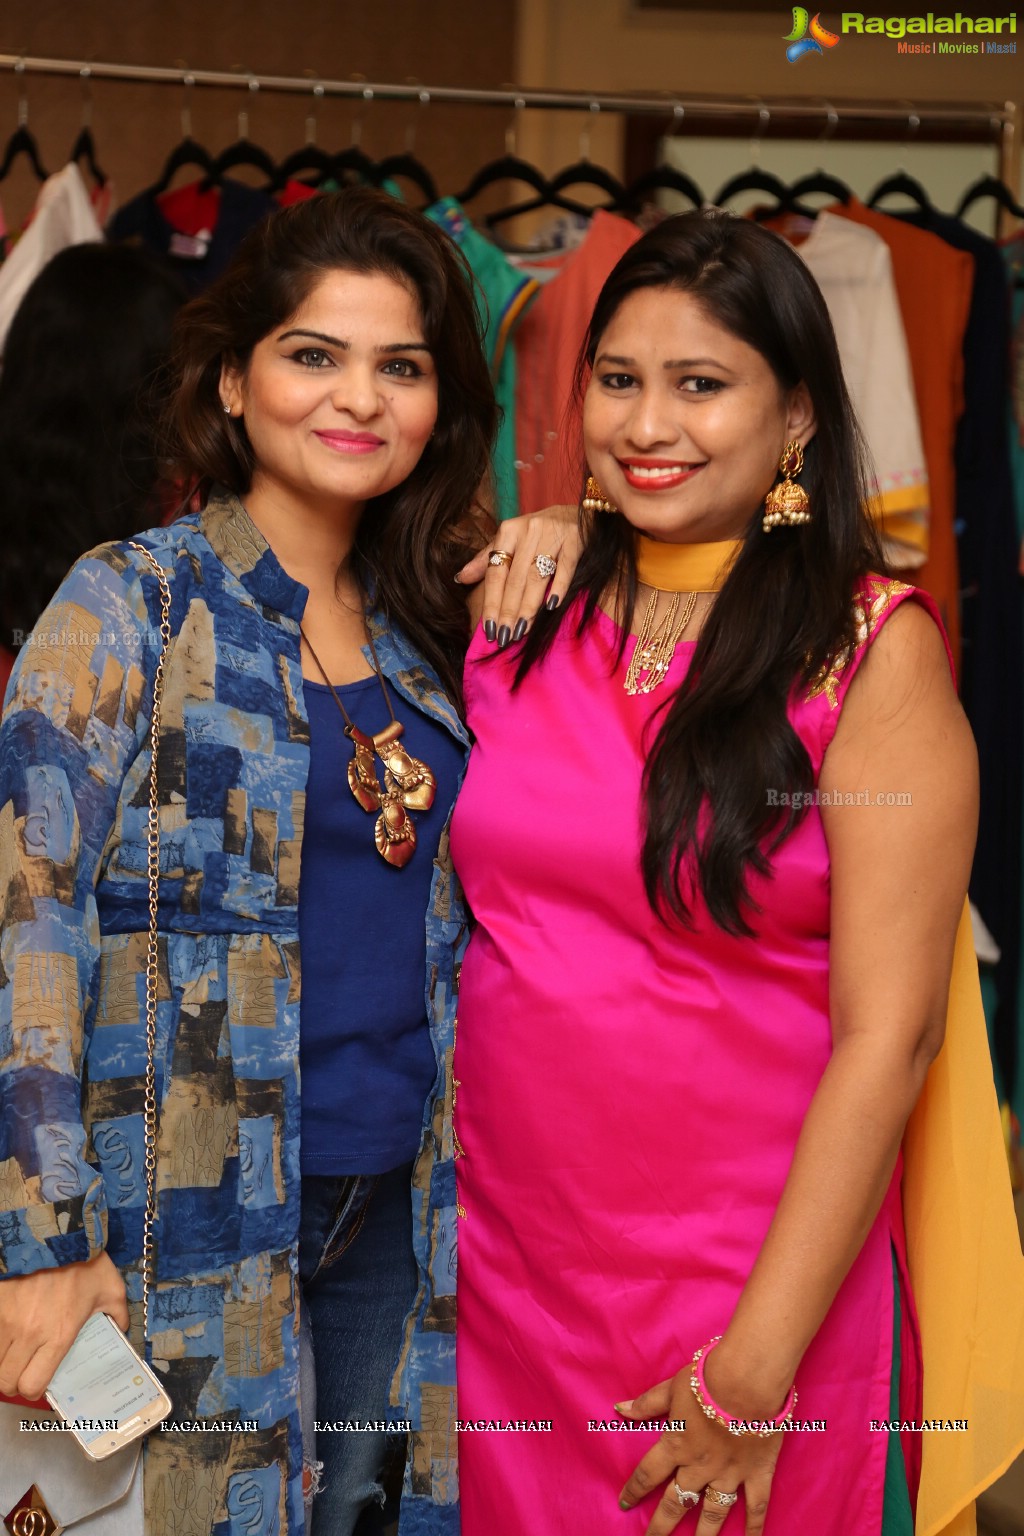 S-Mode by Swetha Reddy Exhibition and Sale at Filmnagar Cultural Center, Hyderabad